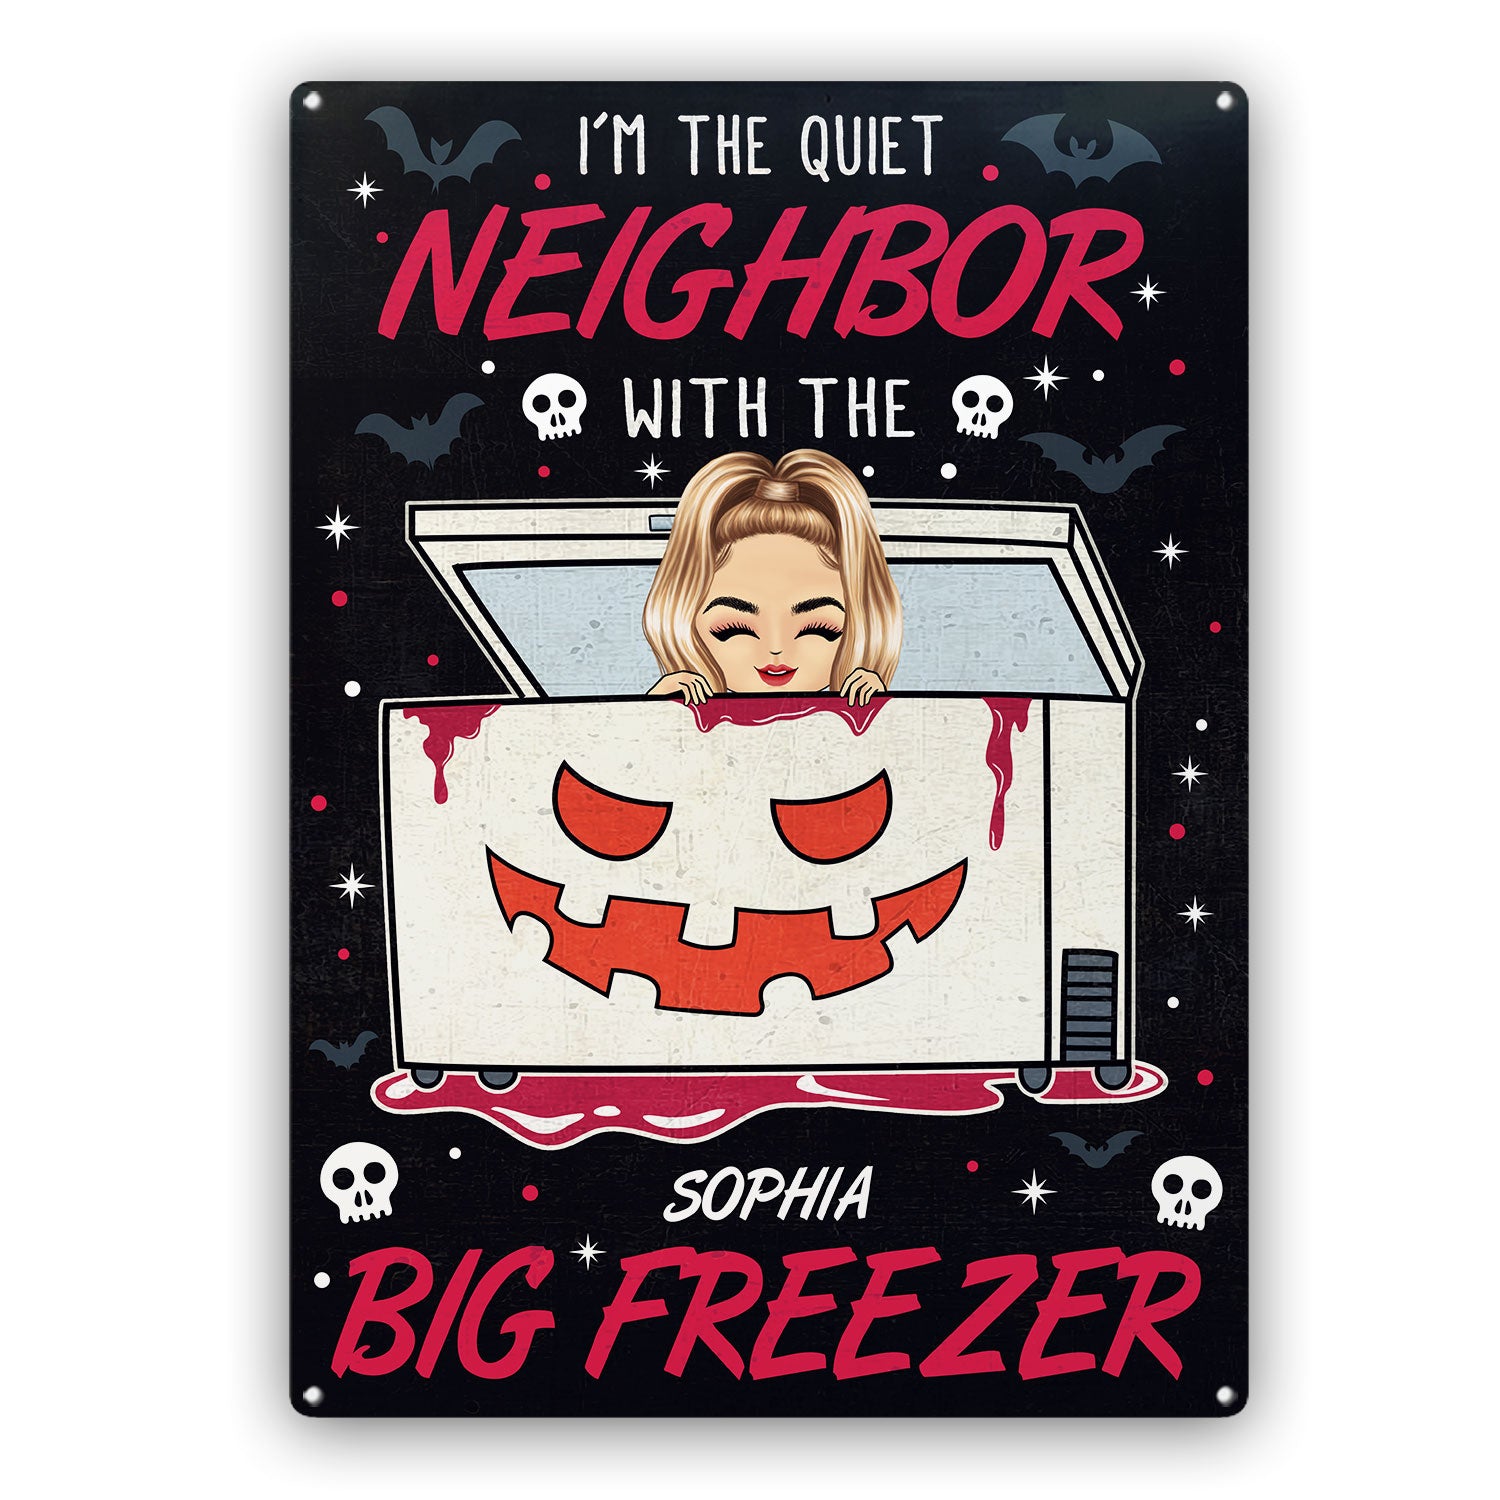 I'm The Quiet Neighbor With The Big Freezer - Backyard Sign, Halloween Outdoor Home Decor, Housewarming Gift For Neighbors, Yourself - Personalized Classic Metal Signs